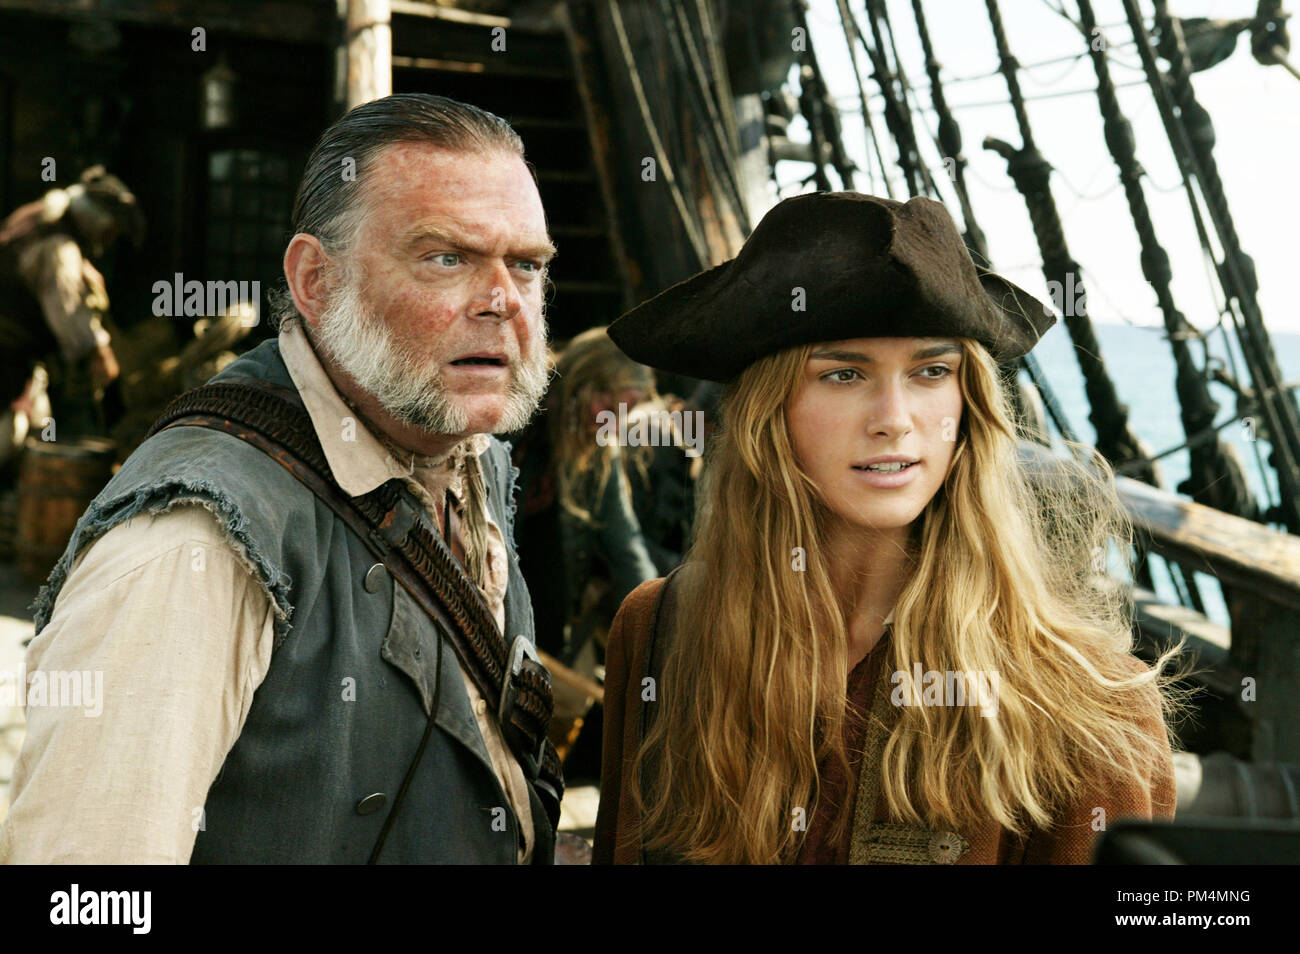 walt-disney-pictures-presents-pirates-of-the-caribbean-dead-mans-chest-kevin-mcnally-keira-knightley-PM4MNG.jpg